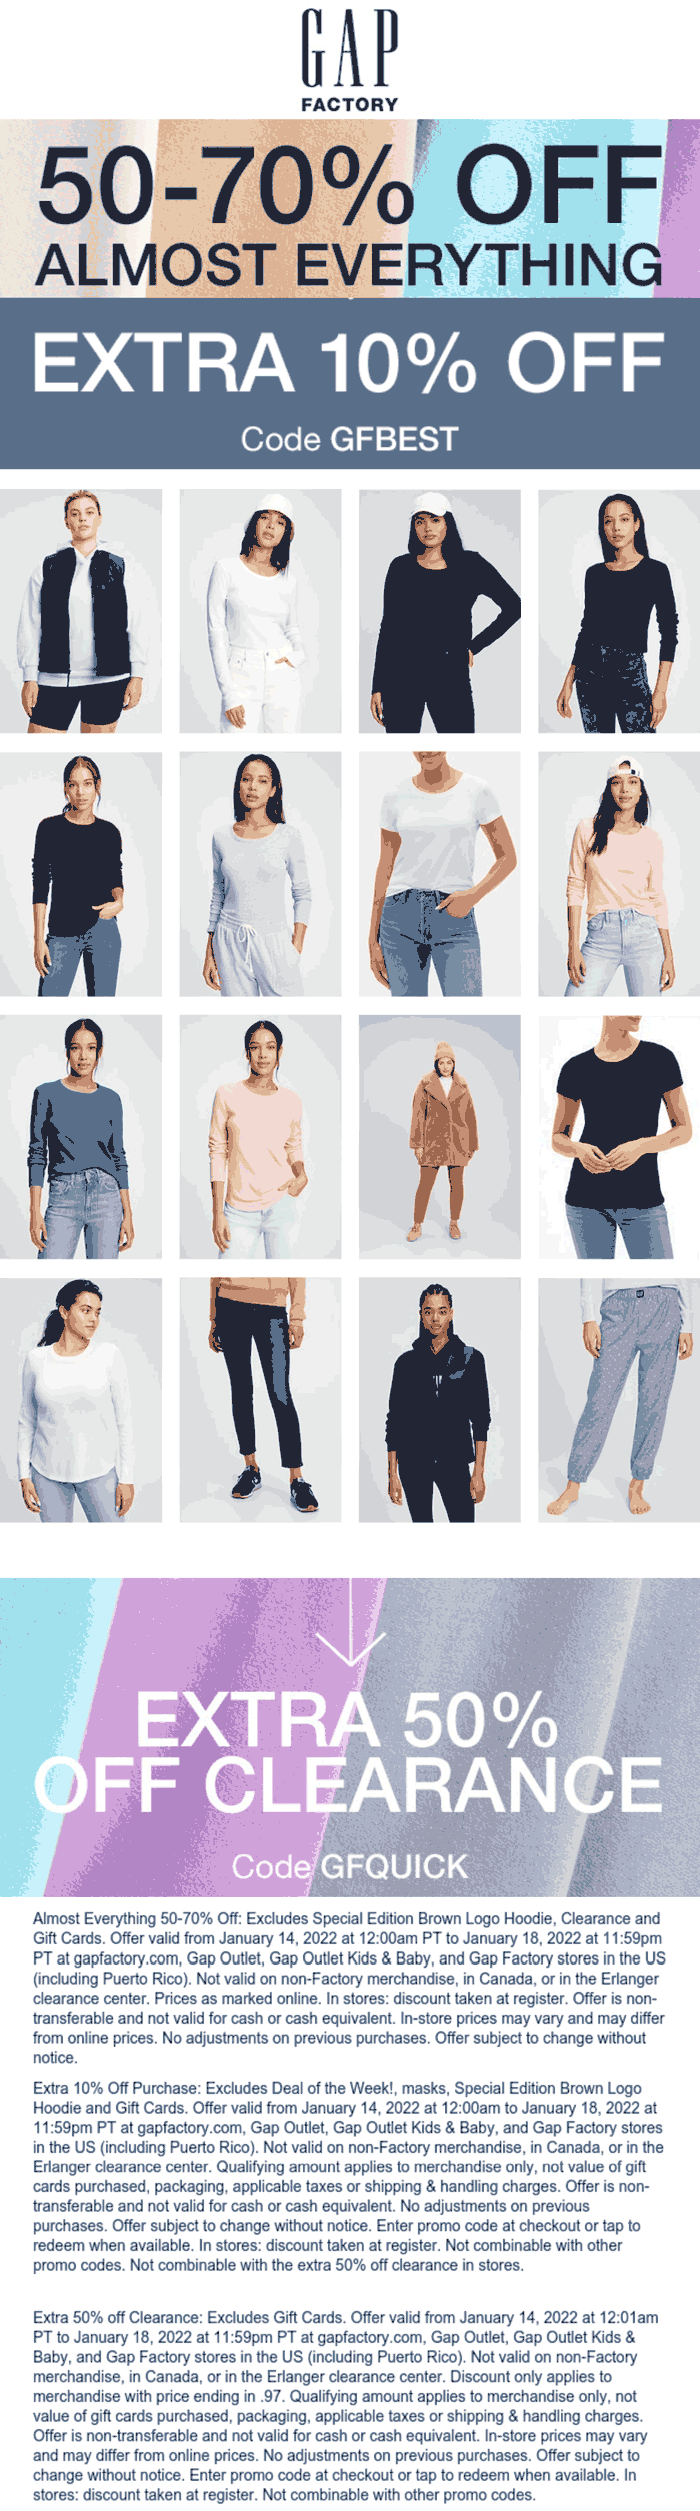 Gap Factory coupons & promo code for [December 2022]